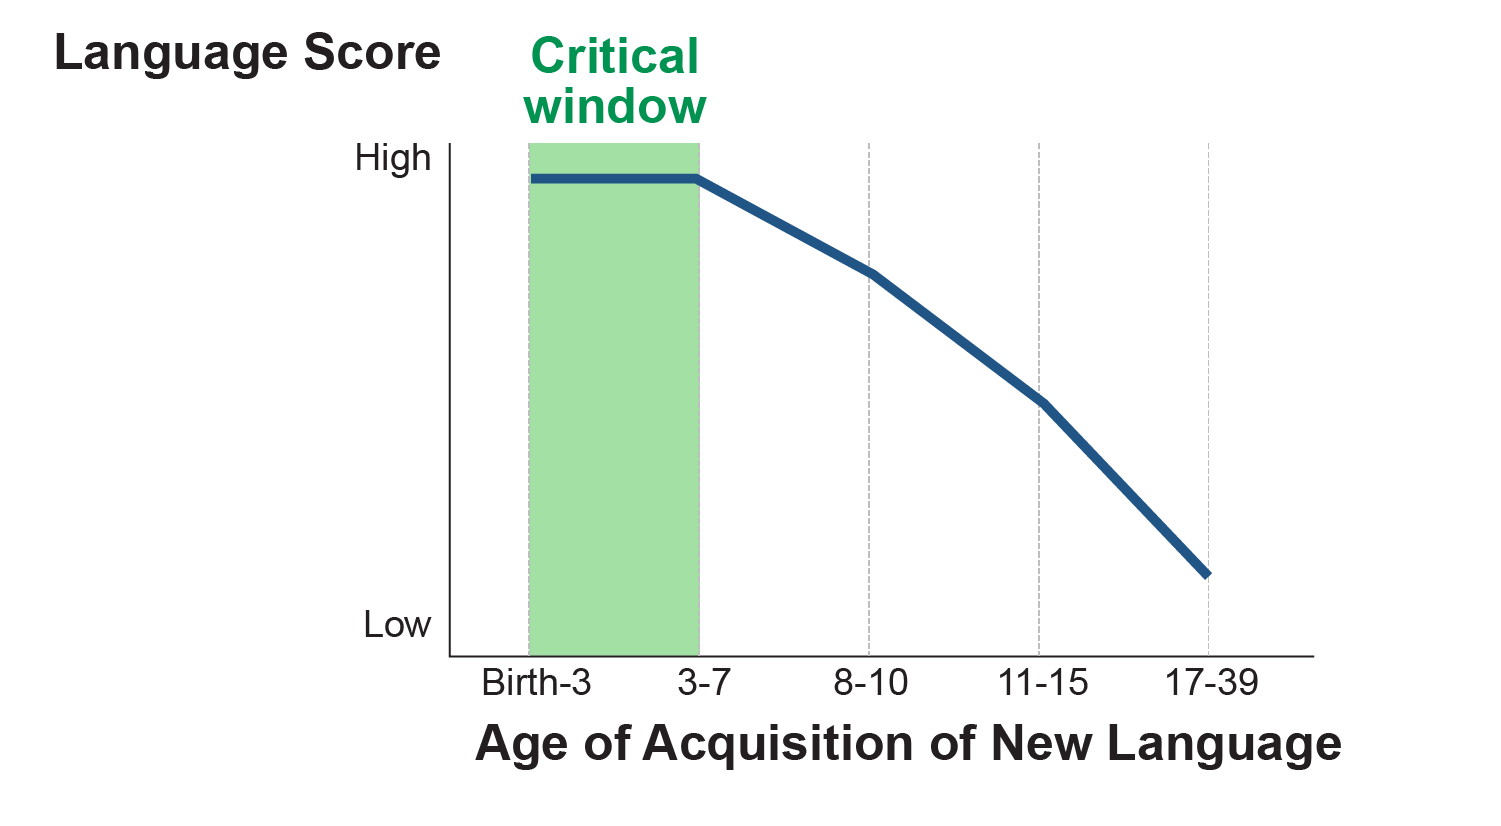 Line graph shows that language scores are highest in children who acquired a new language between birth and age 3. Scores decrease significantly as the age of acquisition increases.